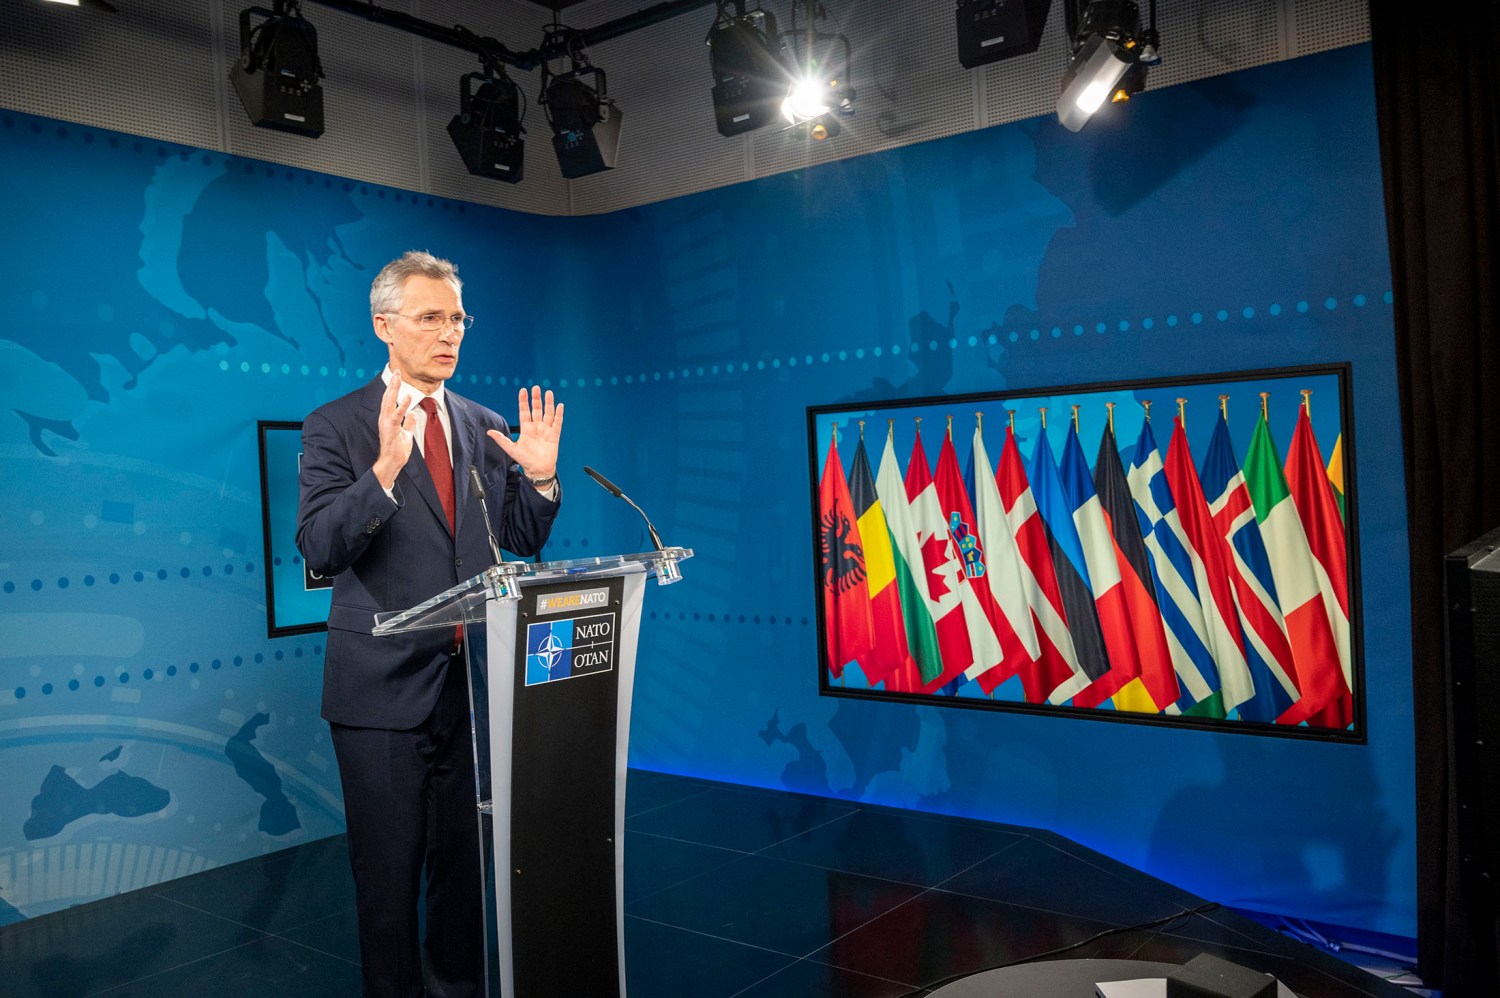 NATO Secretary General Jens Stoltenberg presents his Annual Report for 2019 during a virtual press conference at NATO headquarters. NATO remains strong, united and able to defend itself despite the current coronavirus pandemic, alliance chief Jens Stoltenberg stressed on Wednesday, ahead of foreign ministers' talks this week.